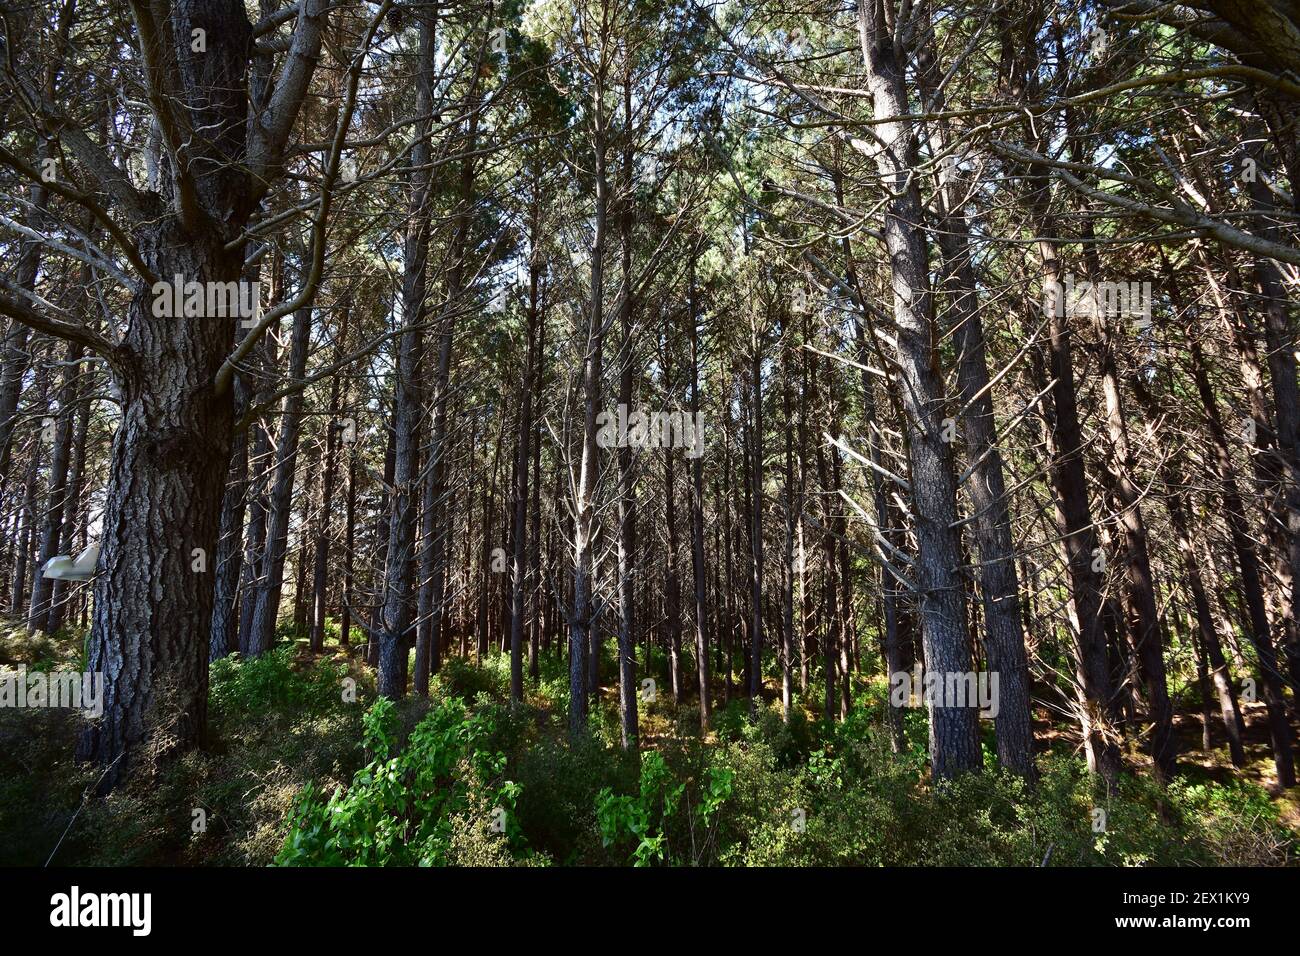 Field or forest of fast growing artificially planted pine trees for timber industry. Stock Photo